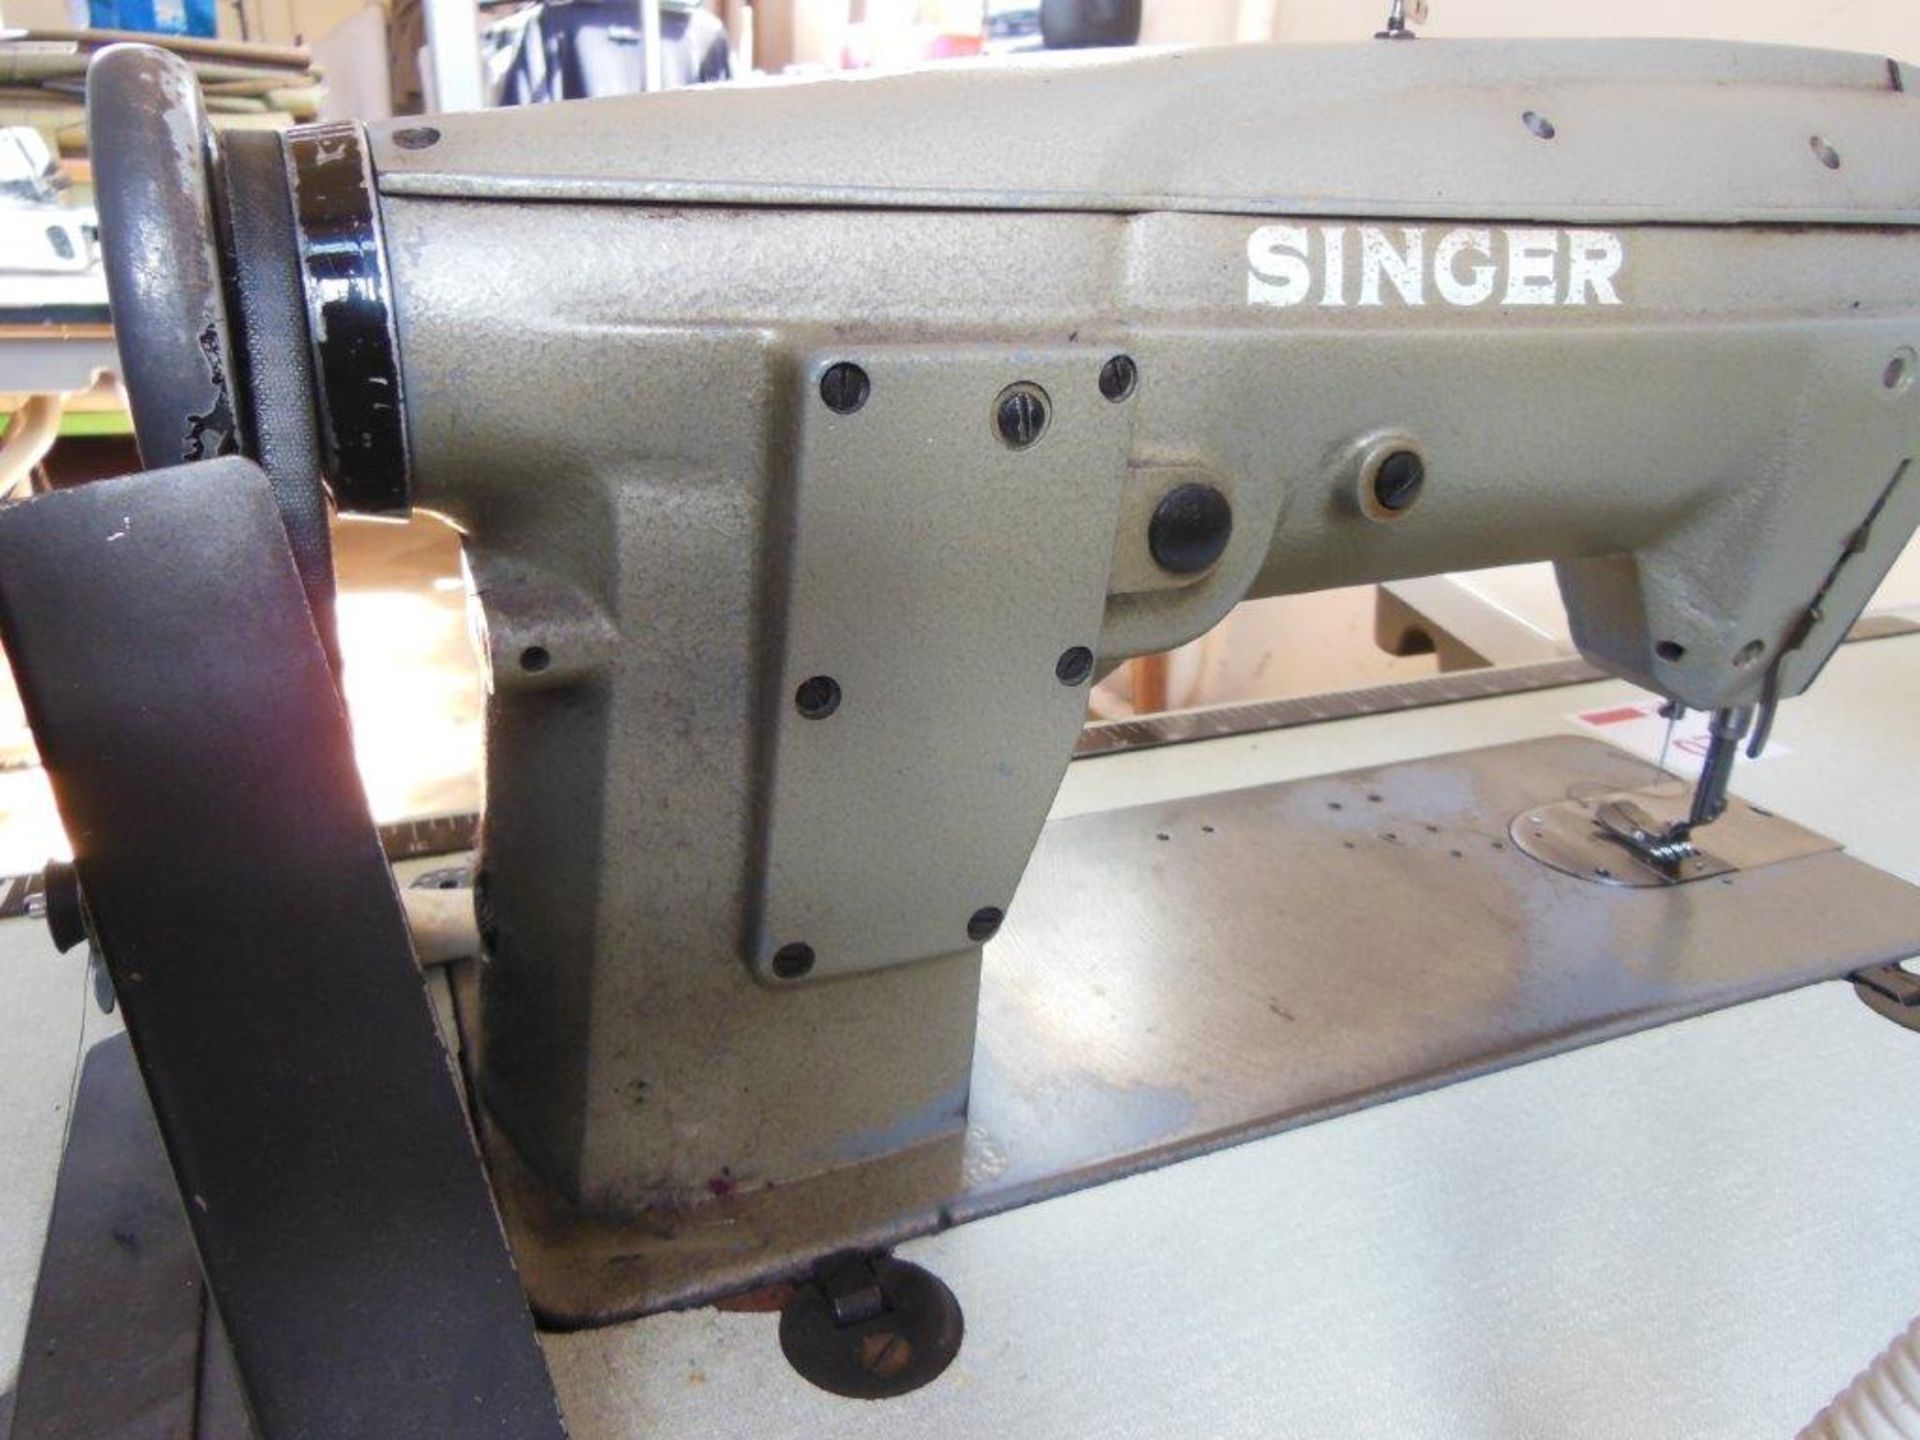 Singer 457G105 zig zag industrial sewing machine, three phase. NB: this item has no CE marking. The - Image 3 of 4